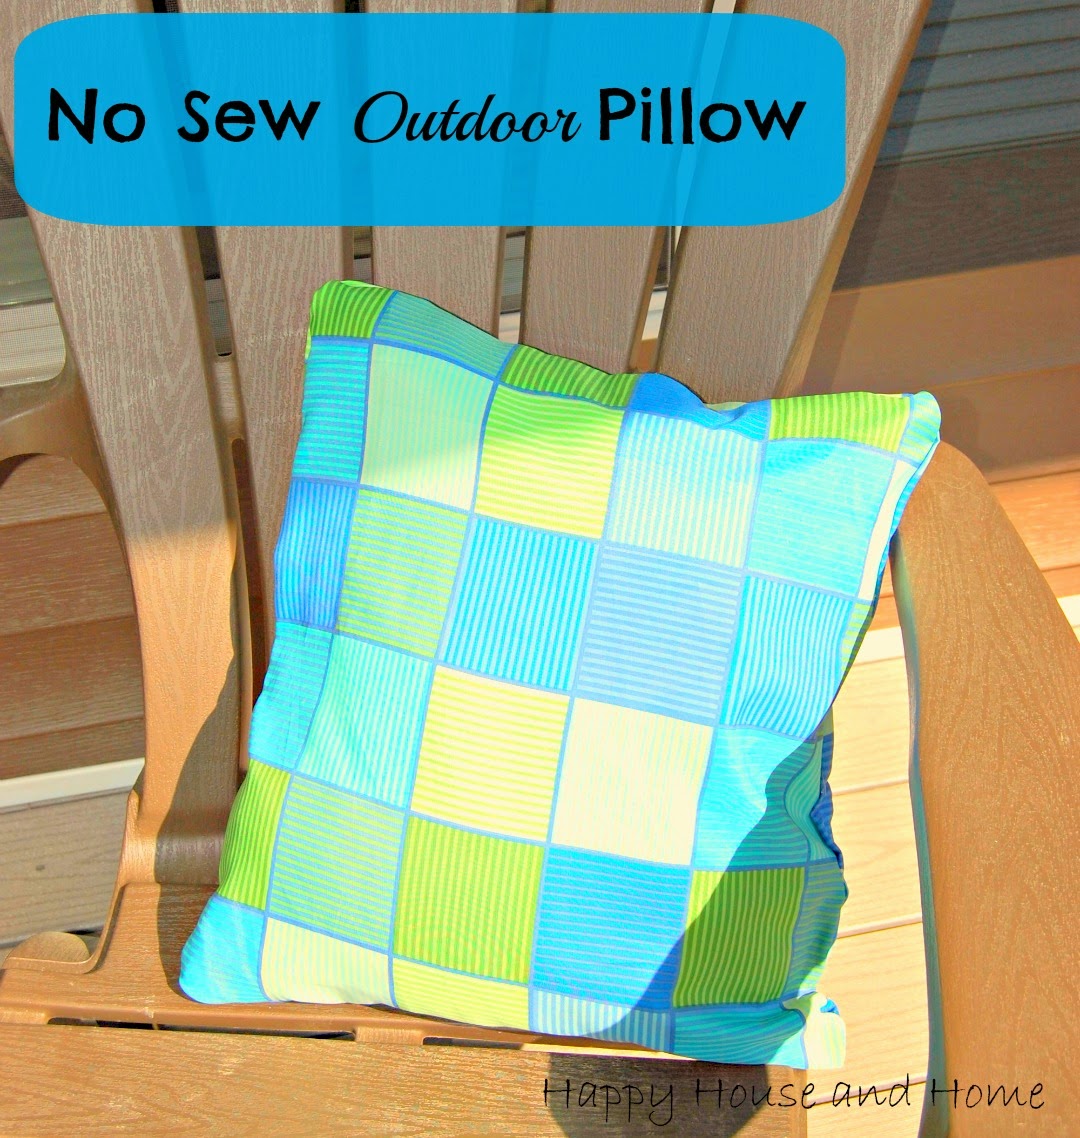 no-sew projects, no-sew pillow, no-sew outdoor pillow, diy pillows, outdoor decor